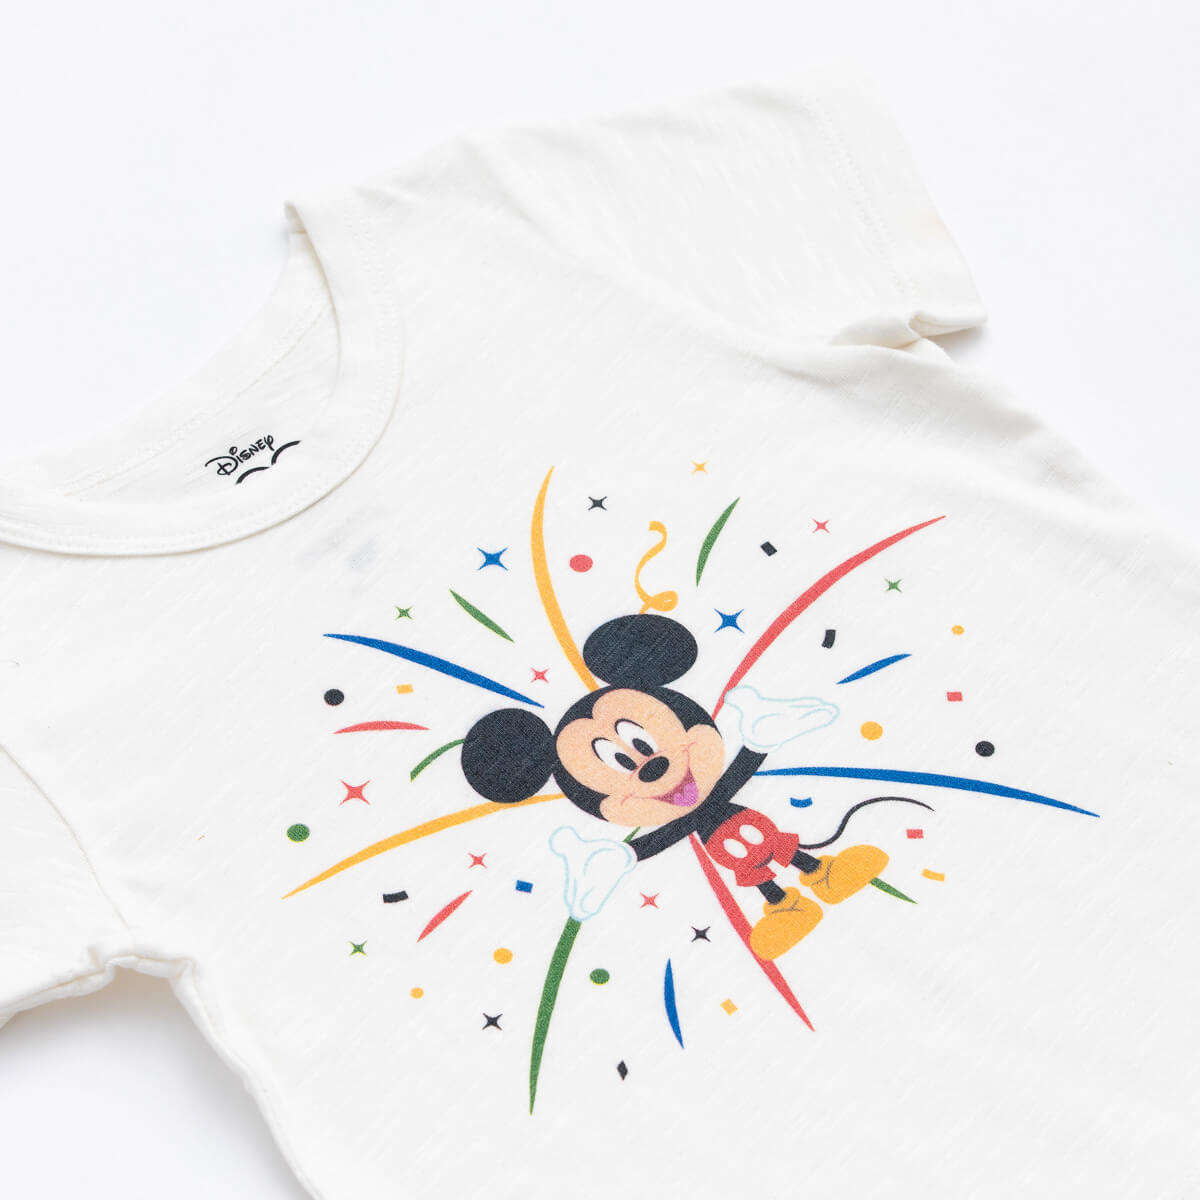 D100 Mickey Mouse On White